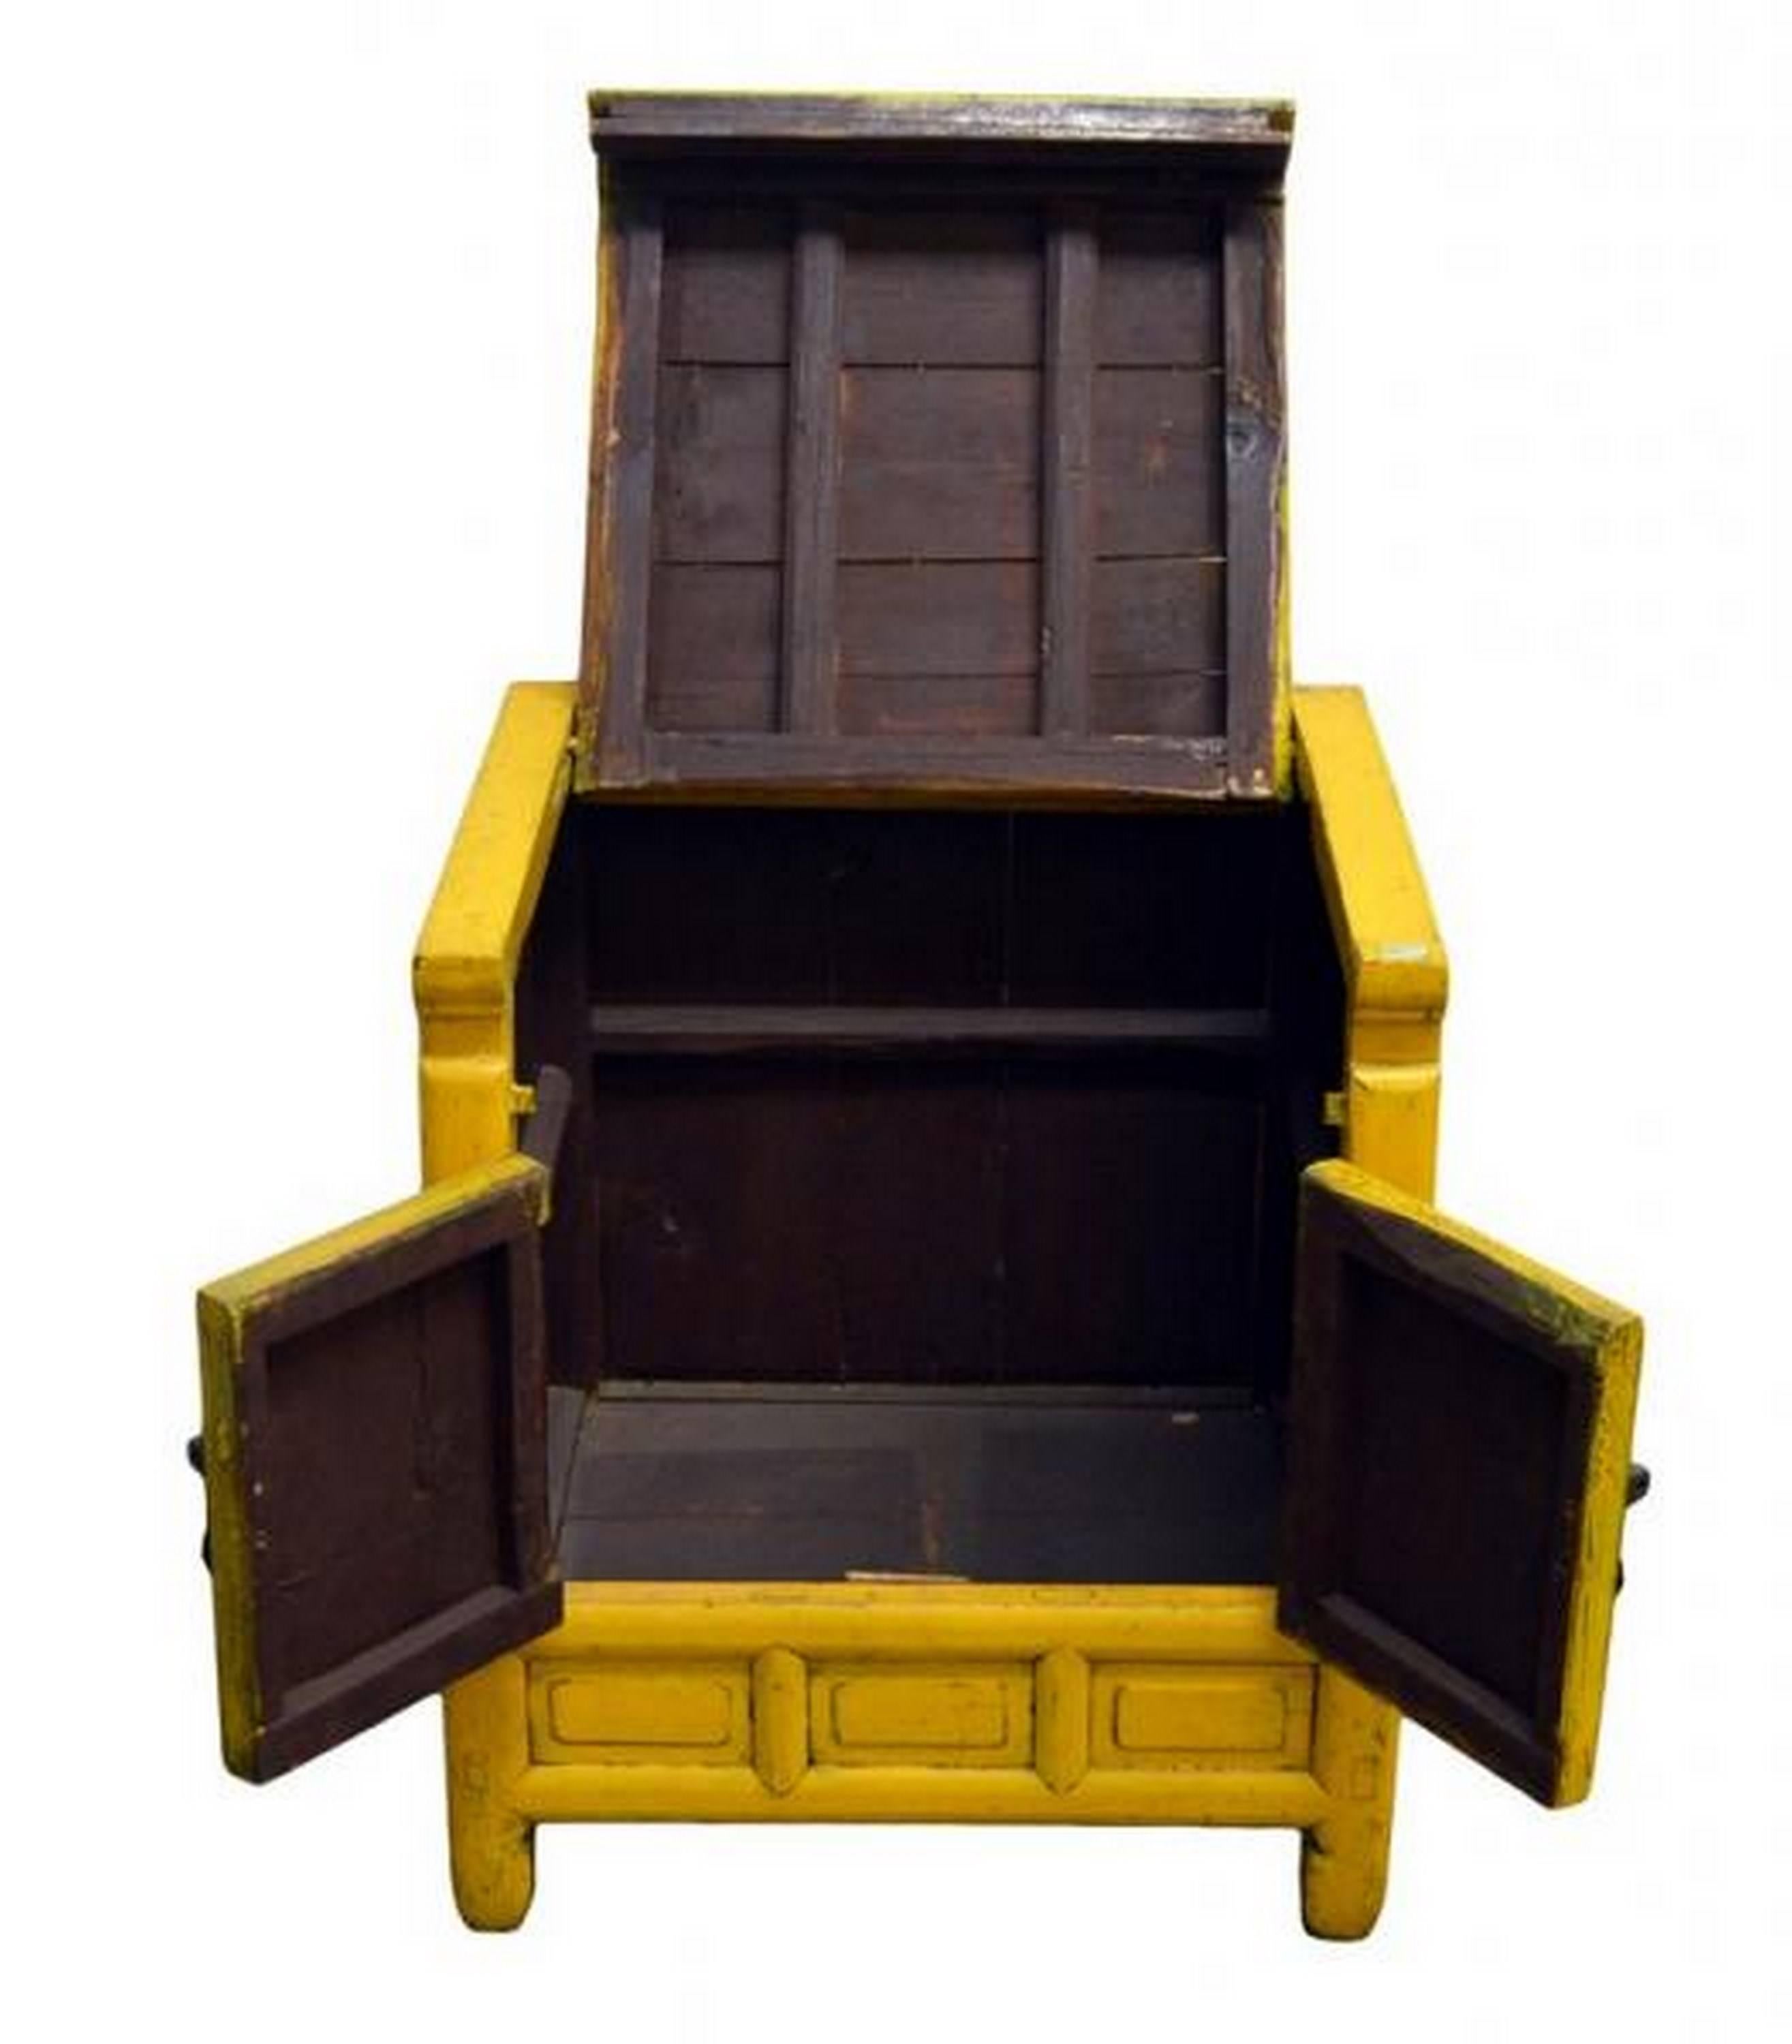 A 19th century Chinese side cabinet with yellow lacquered wood outside and black interior.  This cabinet adopts a cubic form standing on four legs that run from top to bottom.  On the front, the bottom displays three frame patterns below two carved